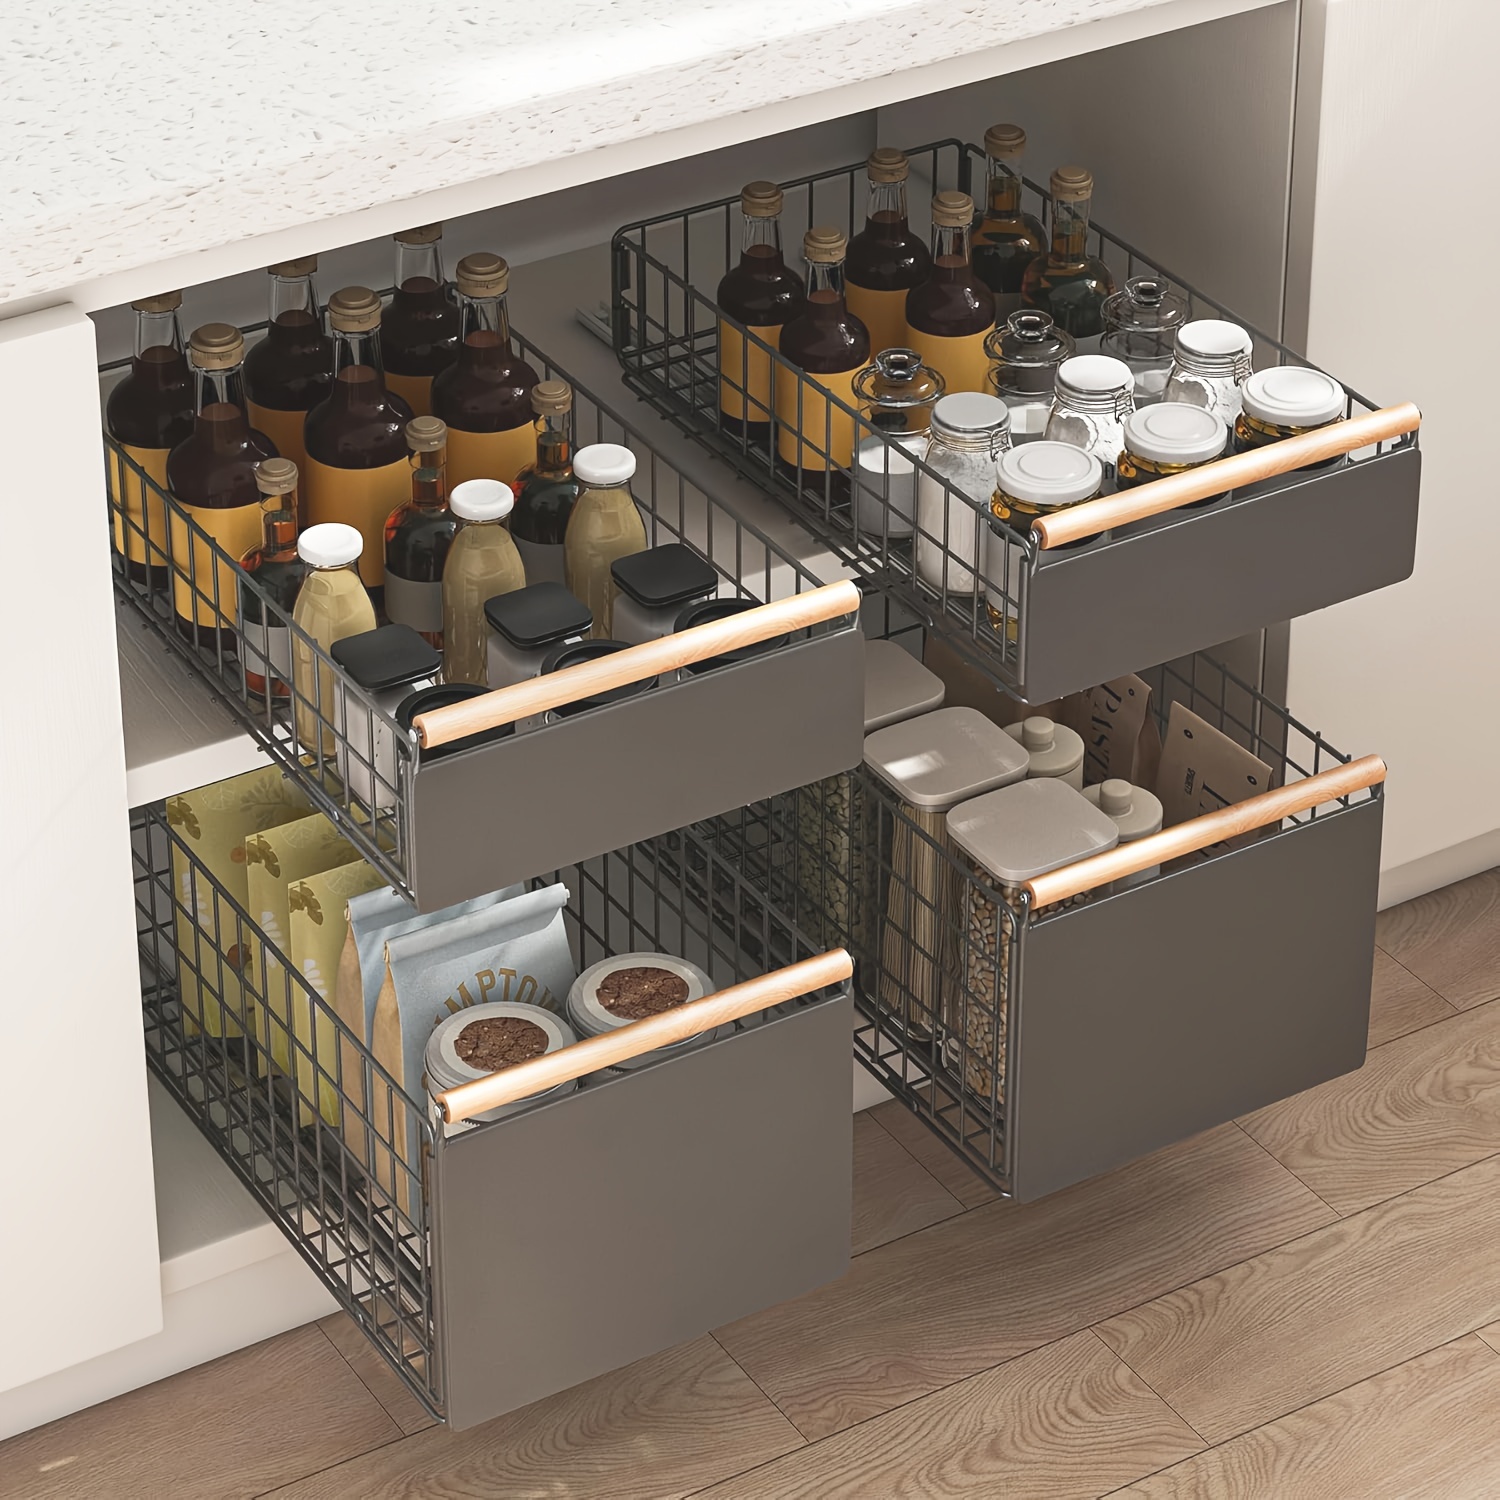 

Pull Out Cabinet Organizer, Heavy Duty Slide Out Drawers Fixed With Adhesive Nano Film, Slide Out Pantry Shelves With Wooden Handle For Kitchen, Pantry, Bathroom